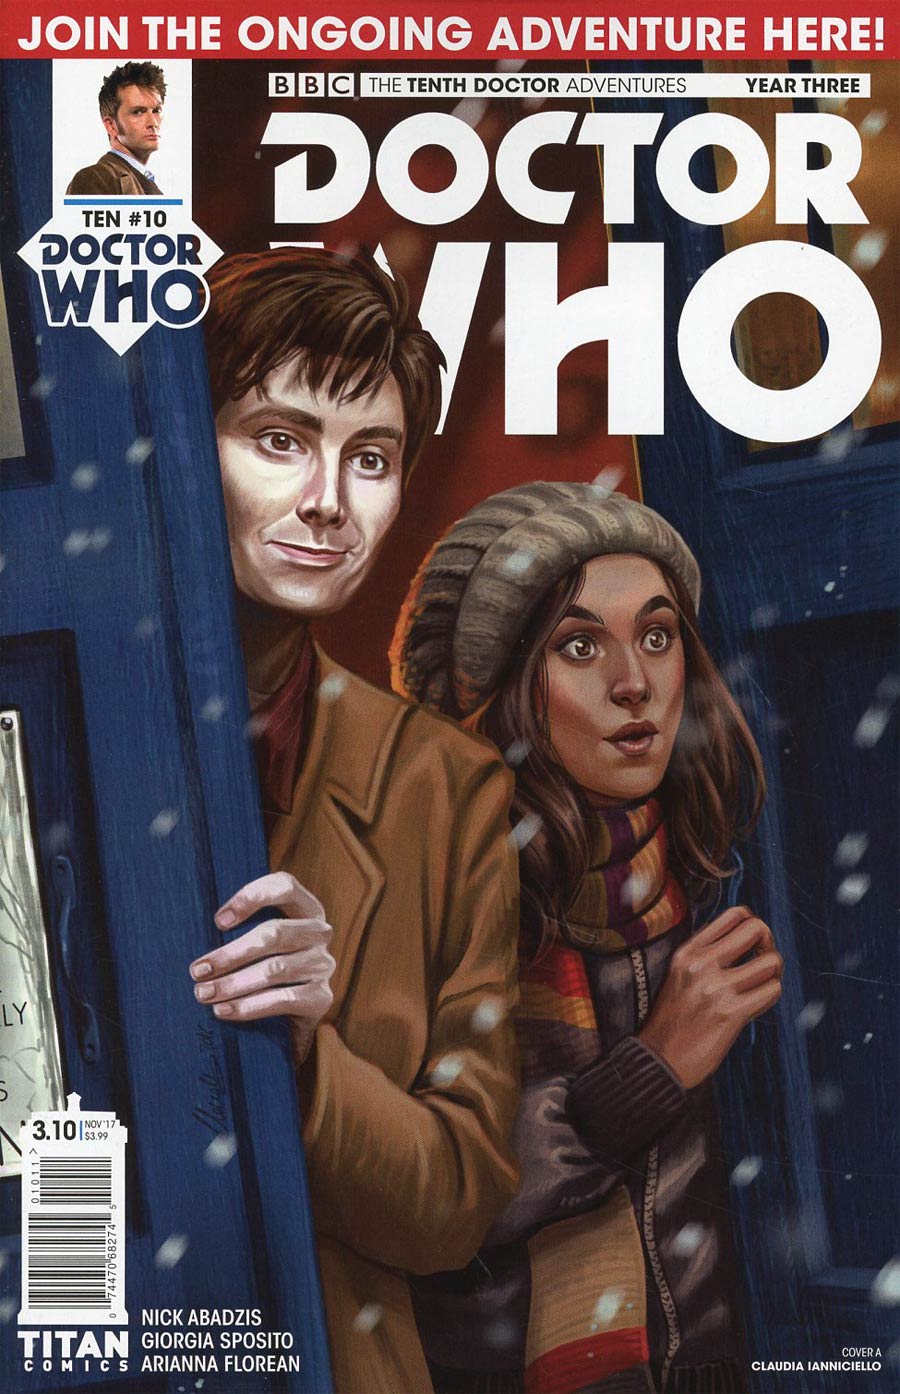 Doctor Who 10th Doctor Year Three #10 Cover A Regular Claudia Ianniciello Cover